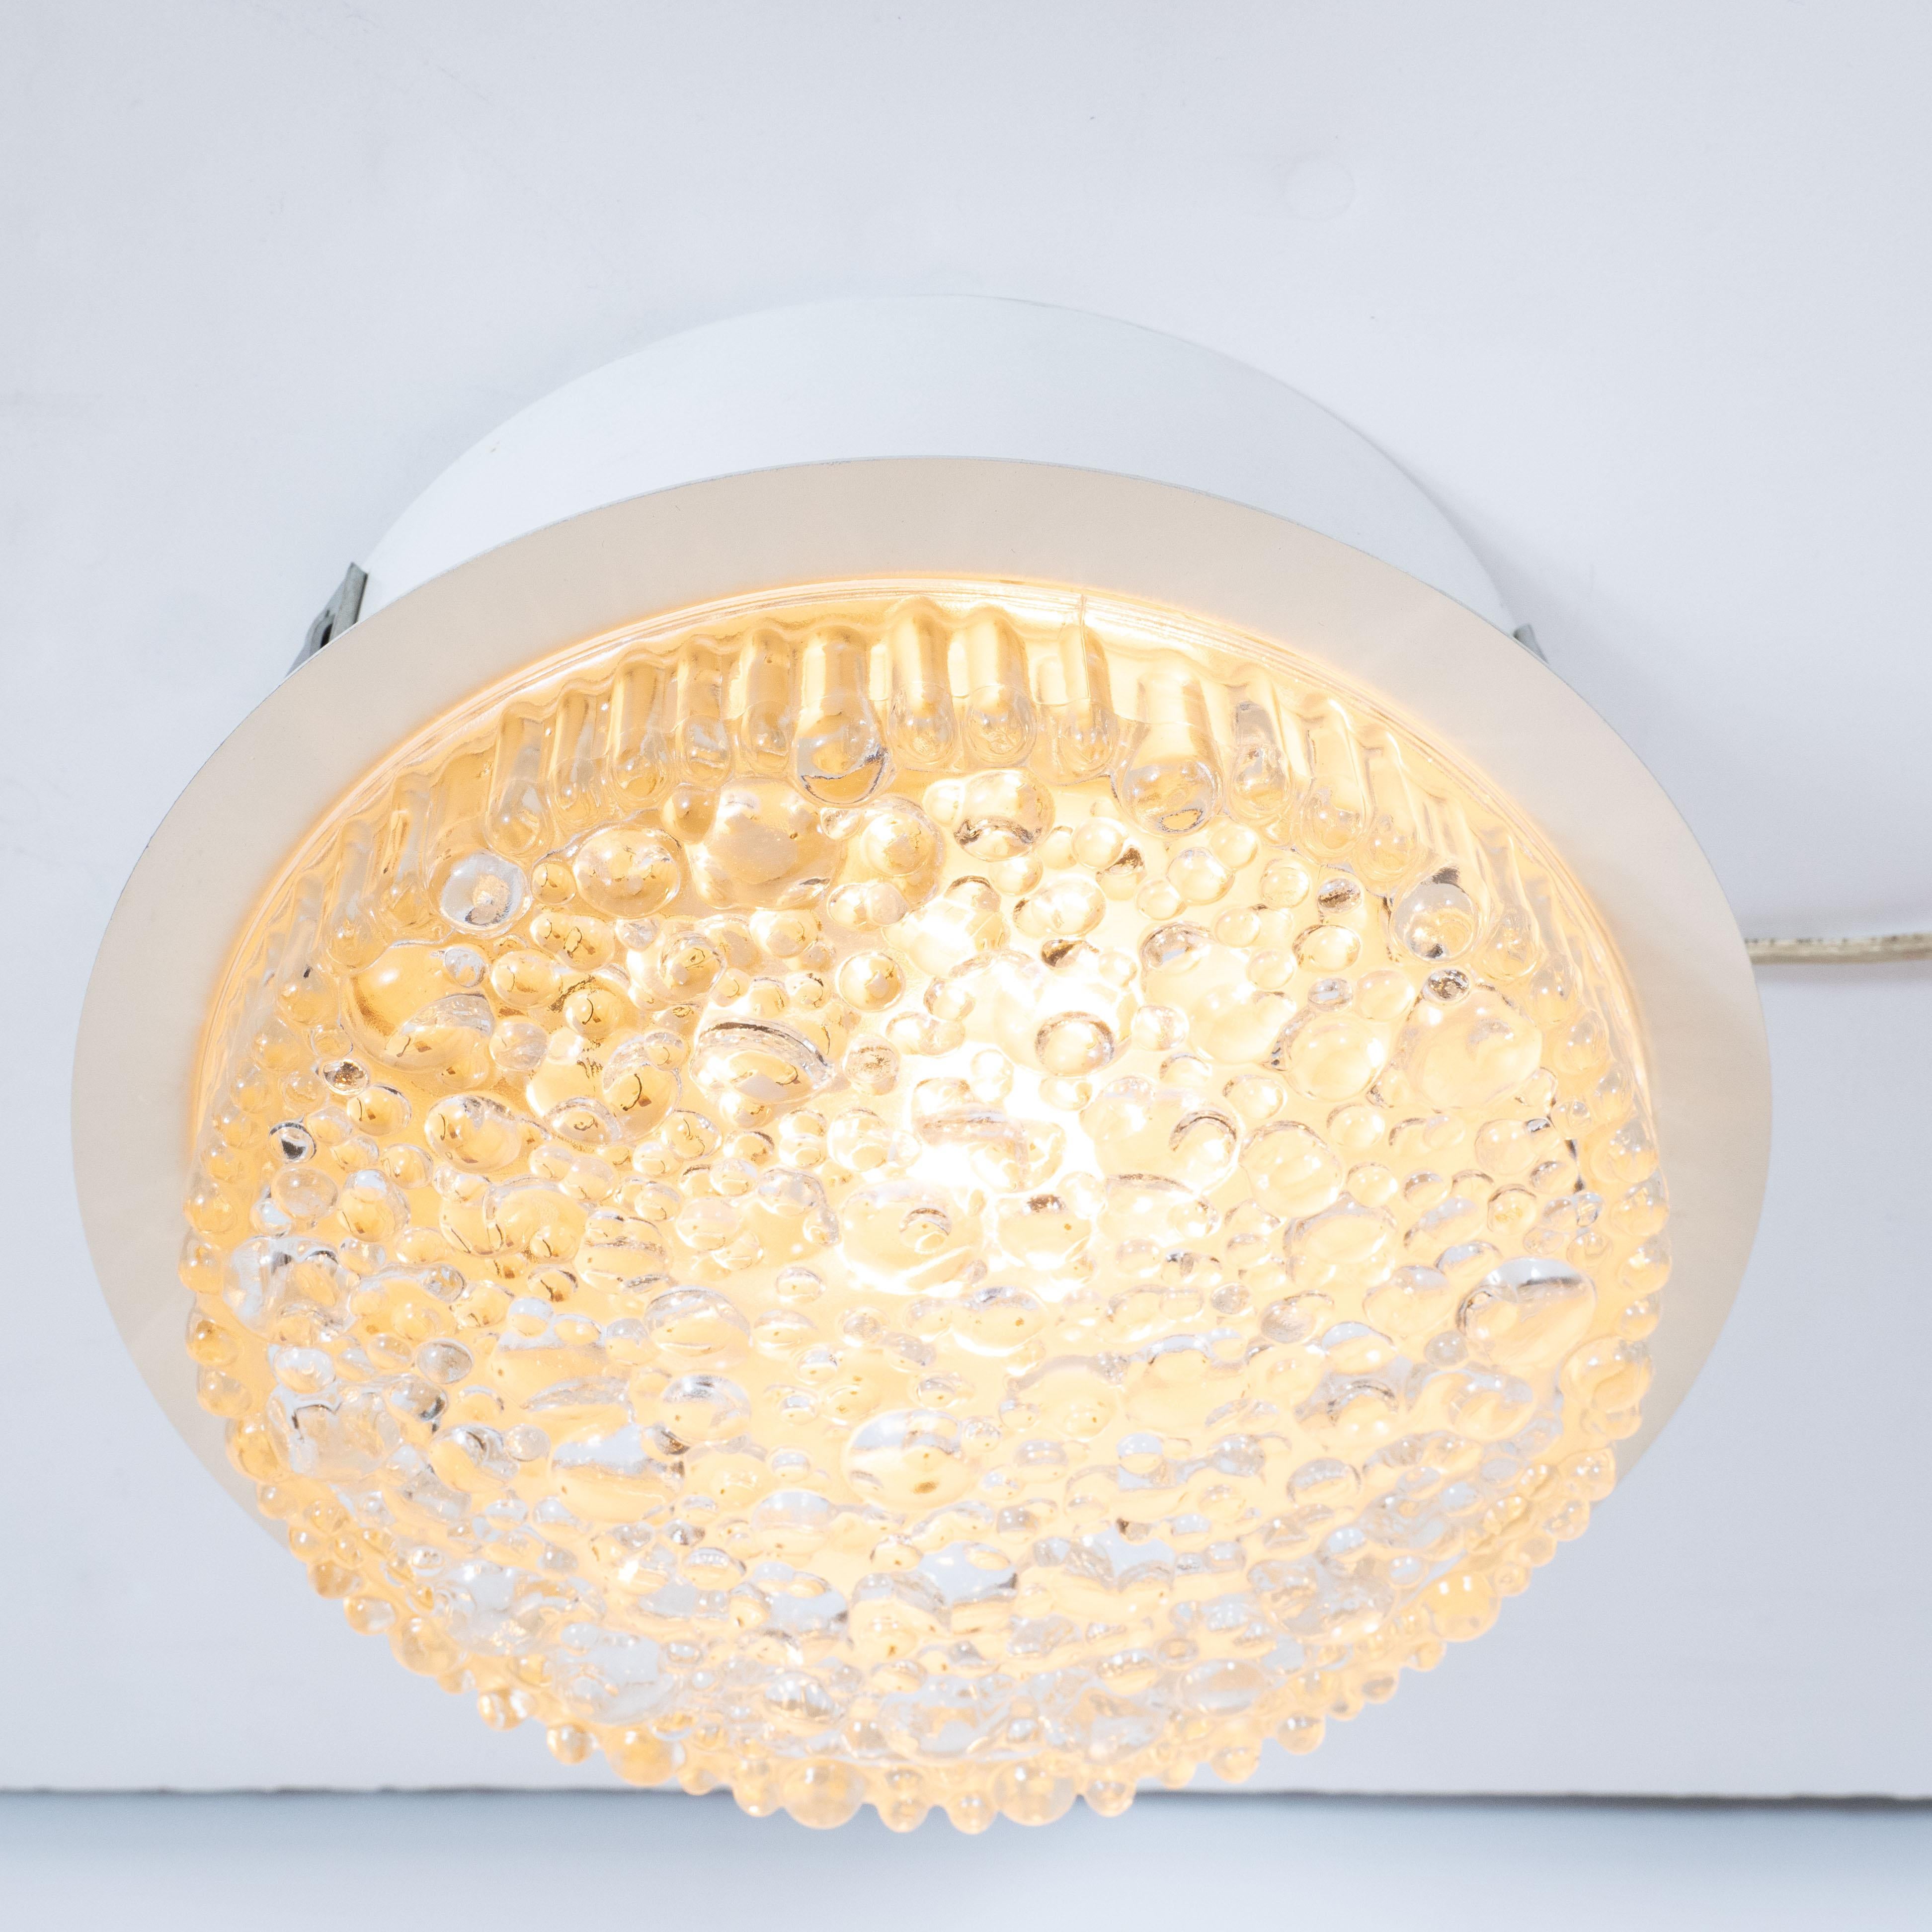 This refined flush mount chandelier was realized in Germany, circa 1960. It features a shallow cylindrical form (intended to be inset into the ceiling) with an abundance of bubbles- raised circular shapes- of varying diameter, lending it a